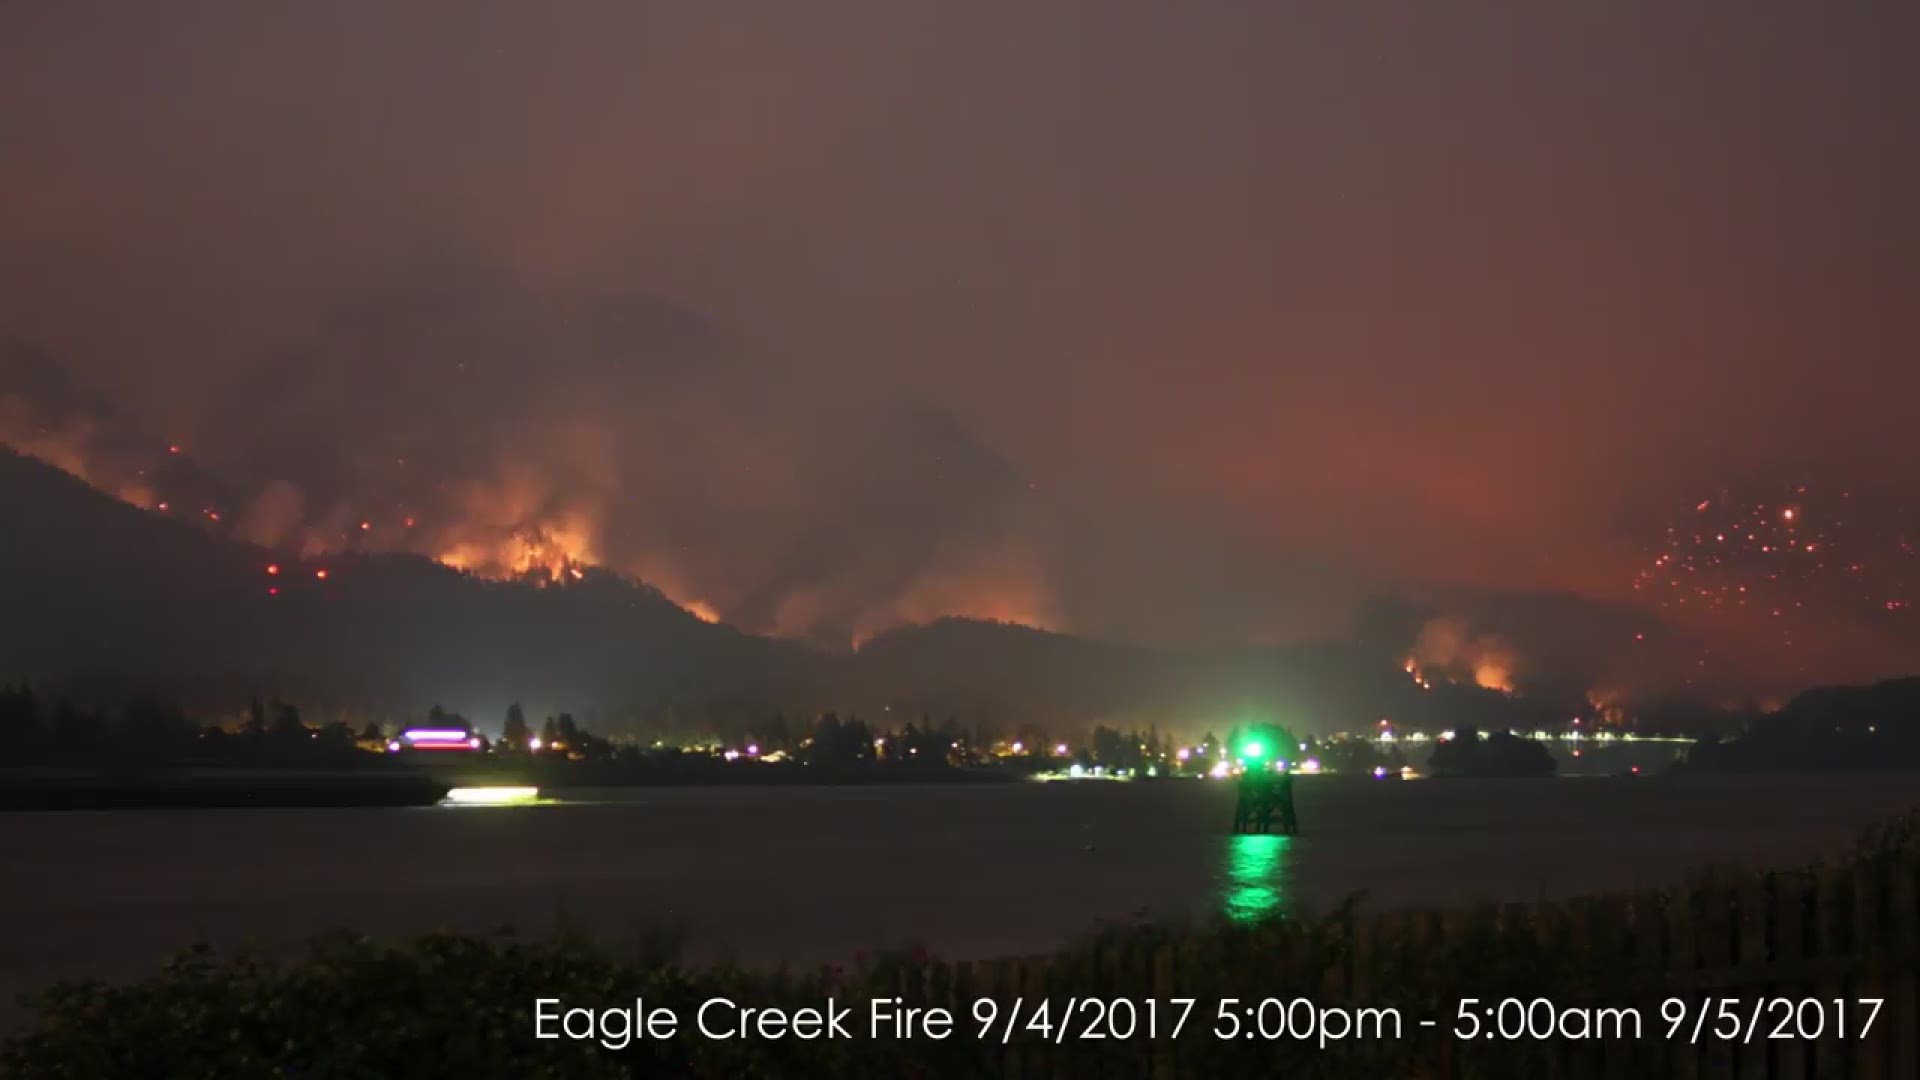 Timelapse of growth of Eagle Creek Fire from overnight from Sept. 4, 2017 to Sept. 5 2017 (Courtesy Oca Hoeflein)